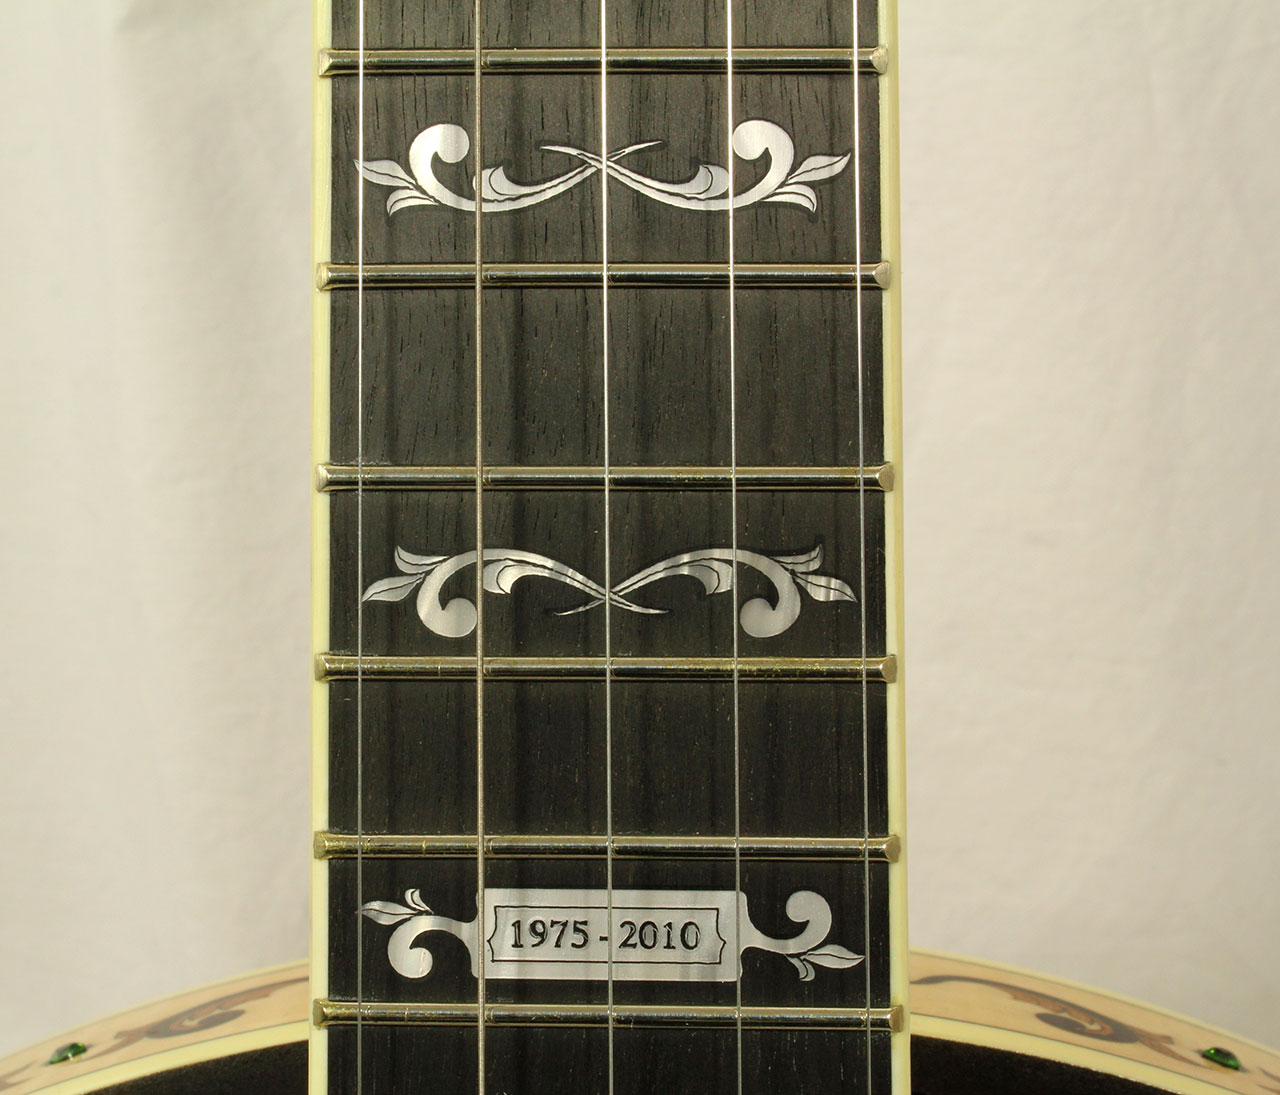 Deerring 35th Anniversary Limited Edition Banjo  Upper neck inlays and plaque